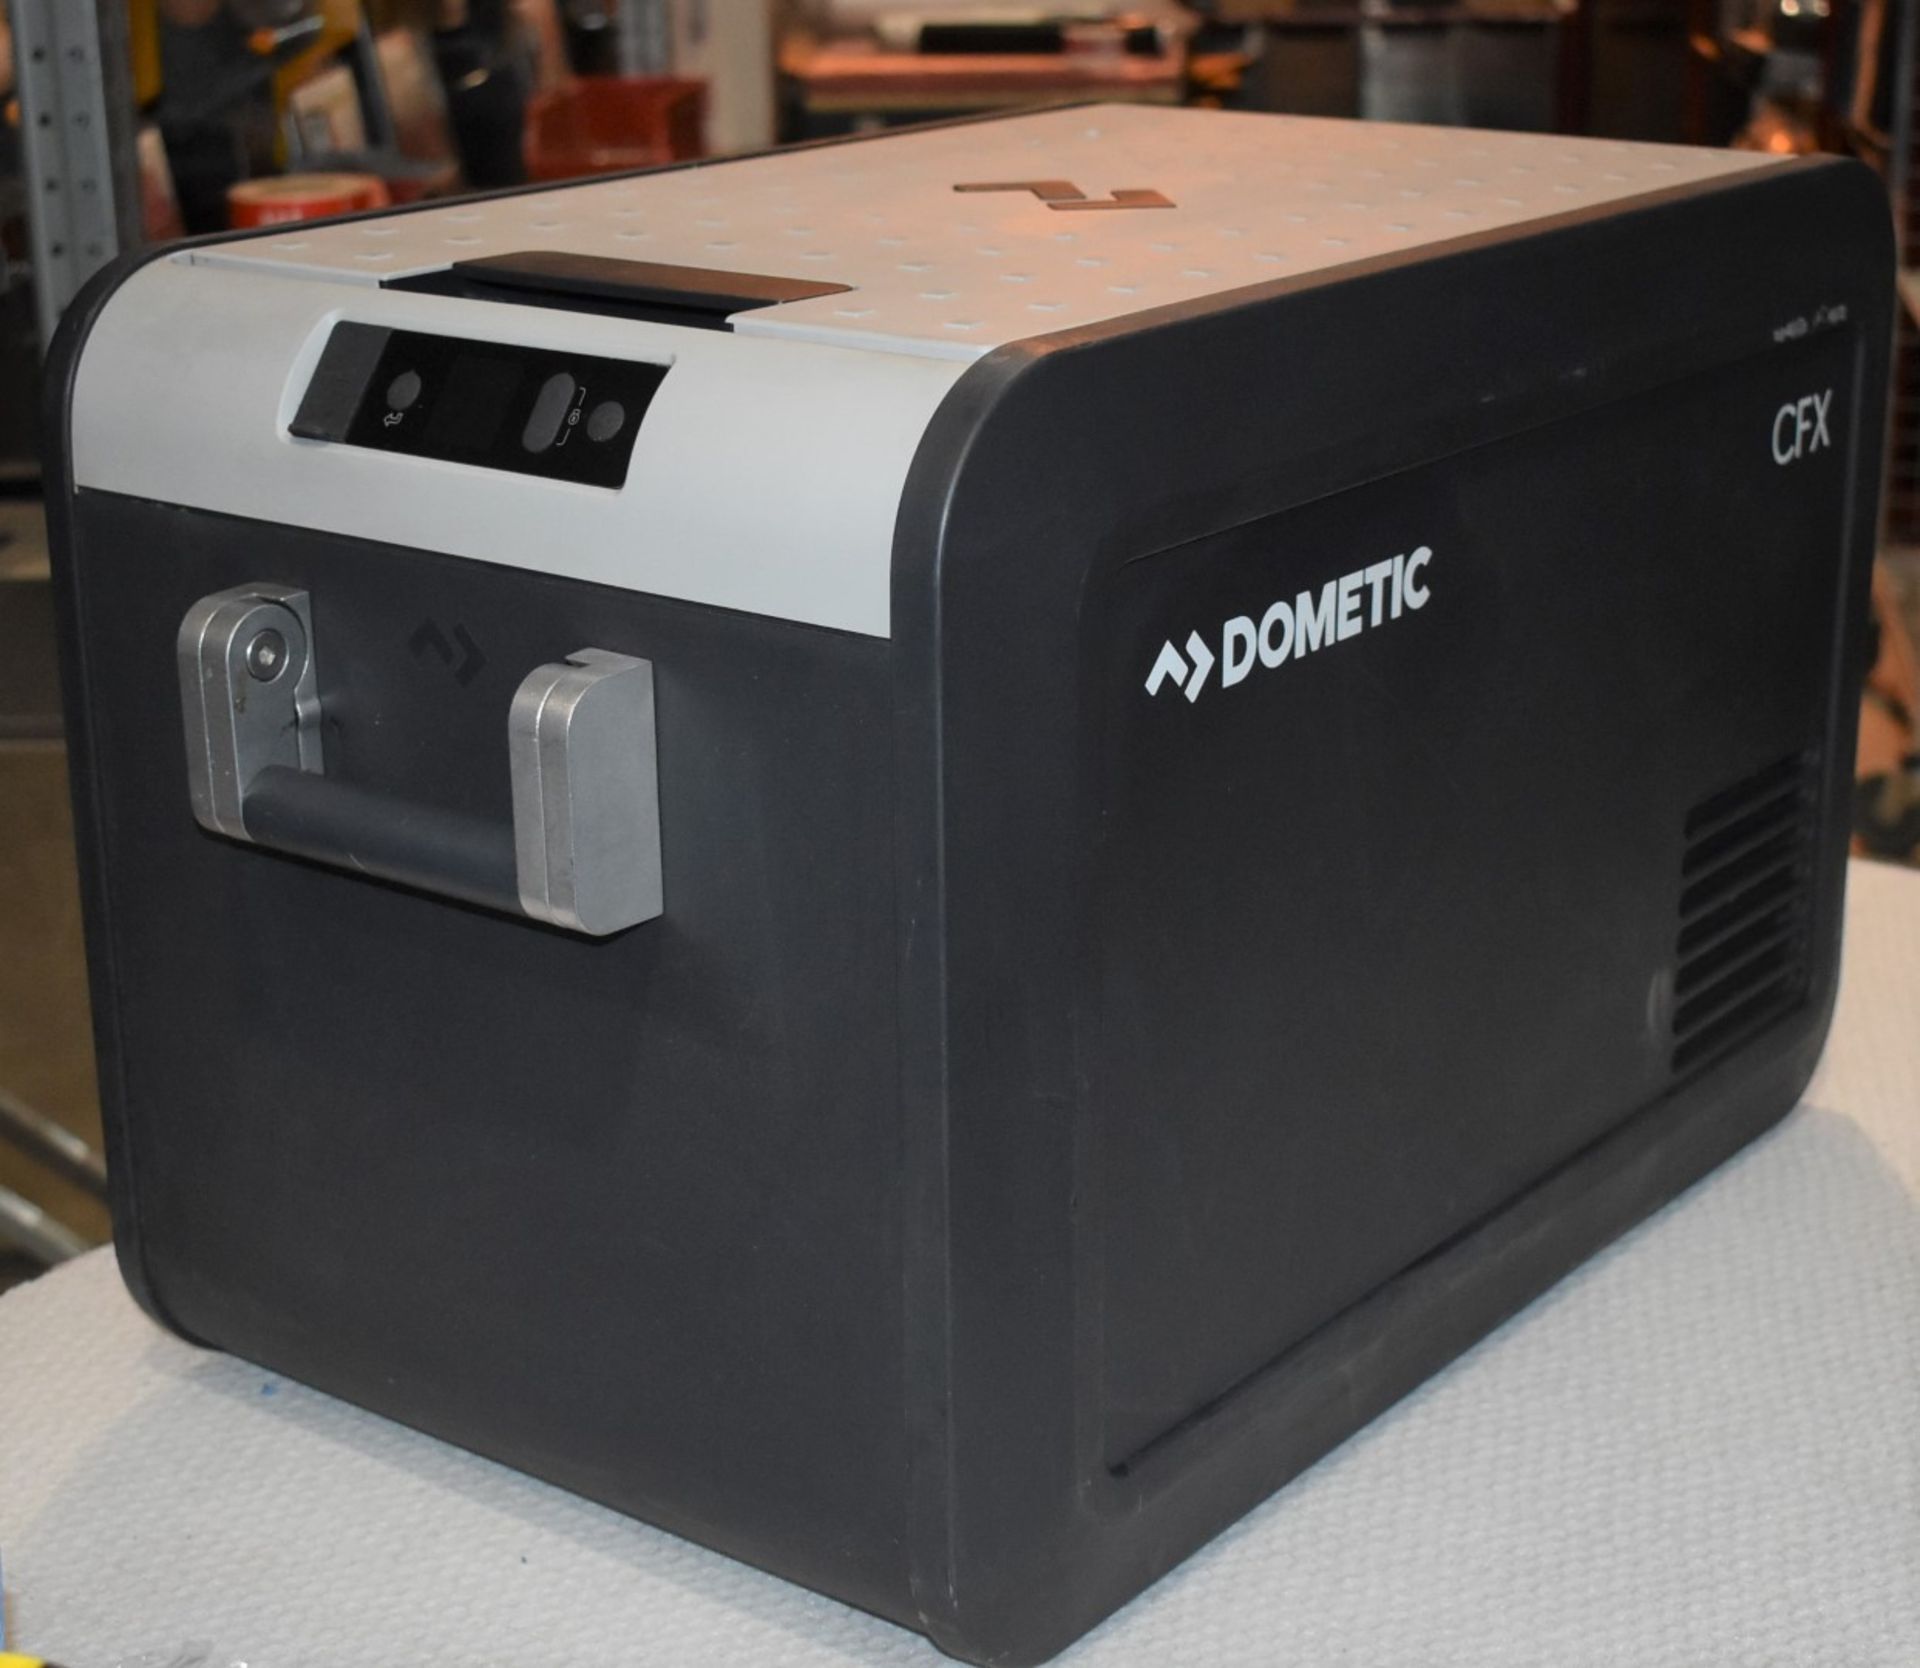 1 x Dometic CFX3 35 Portable 32l Compressor Cooler and Freezer - Perfect For Cooling The BBQ Beers - - Image 9 of 9